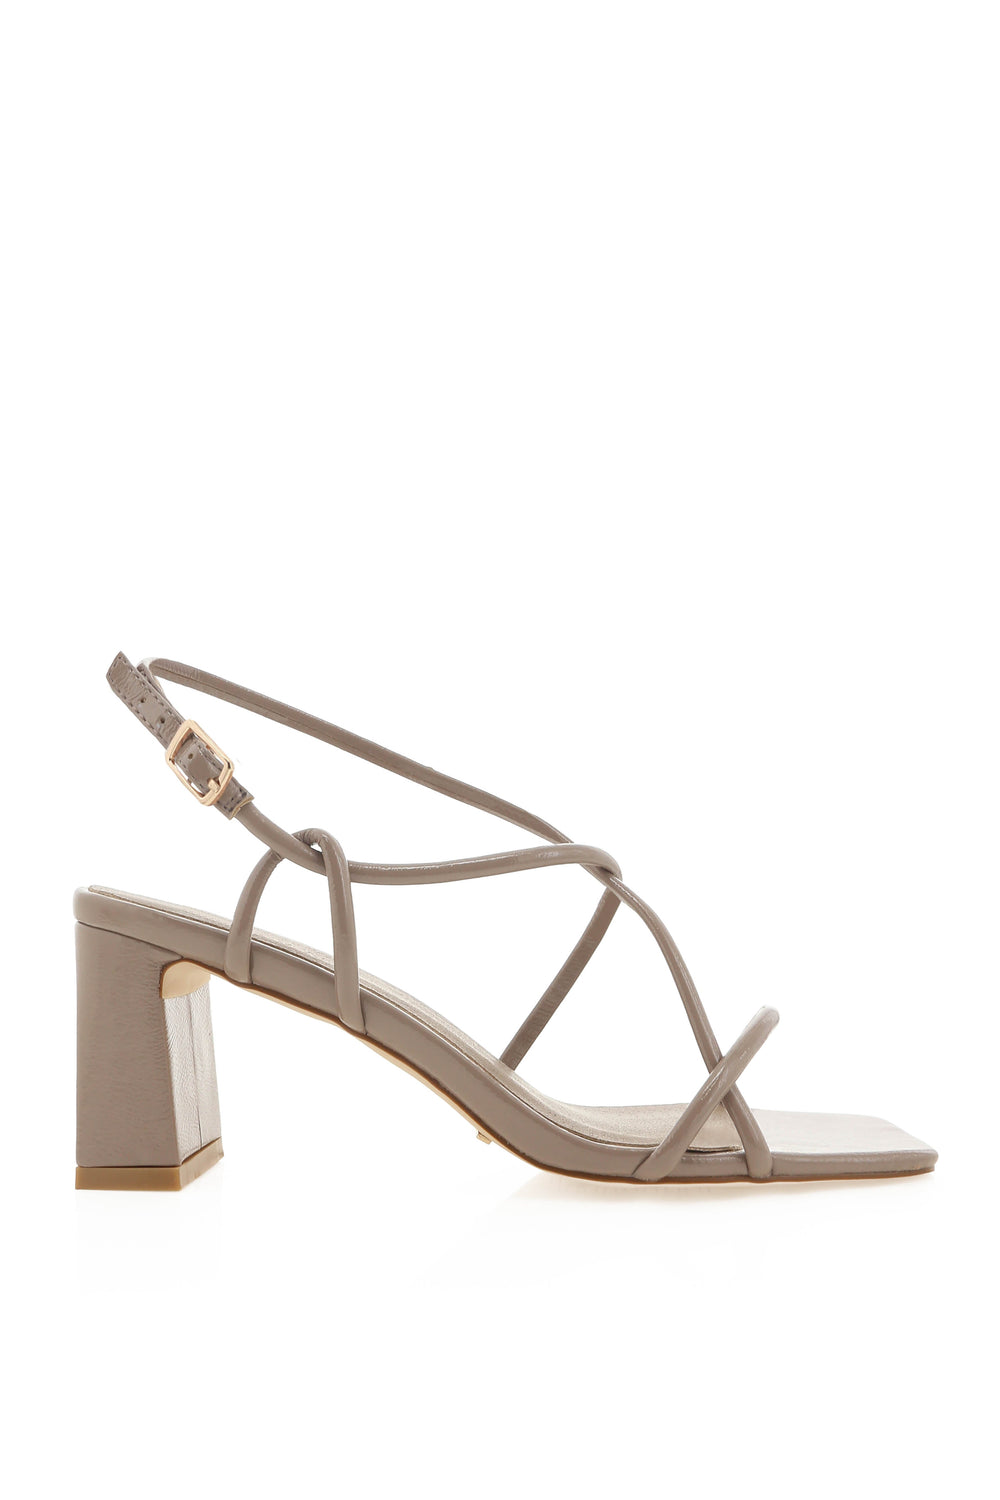 Petal and Pup USA SHOES Iriana Heel - Taupe Crinkle Patent